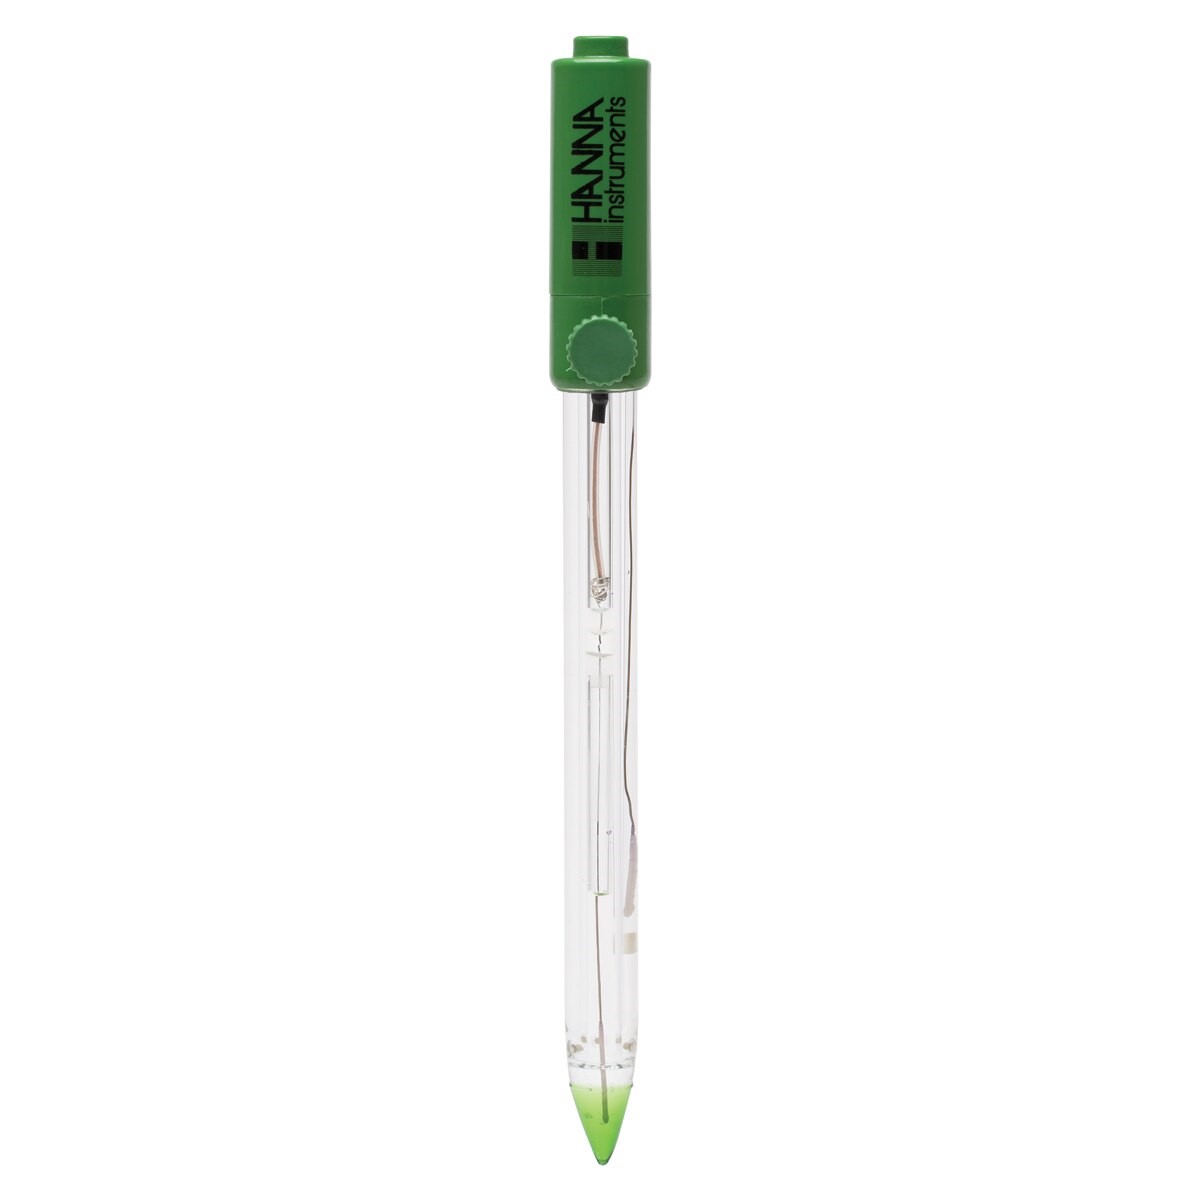 HI1053P Refillable, Combination pH Electrode with Conical Tip